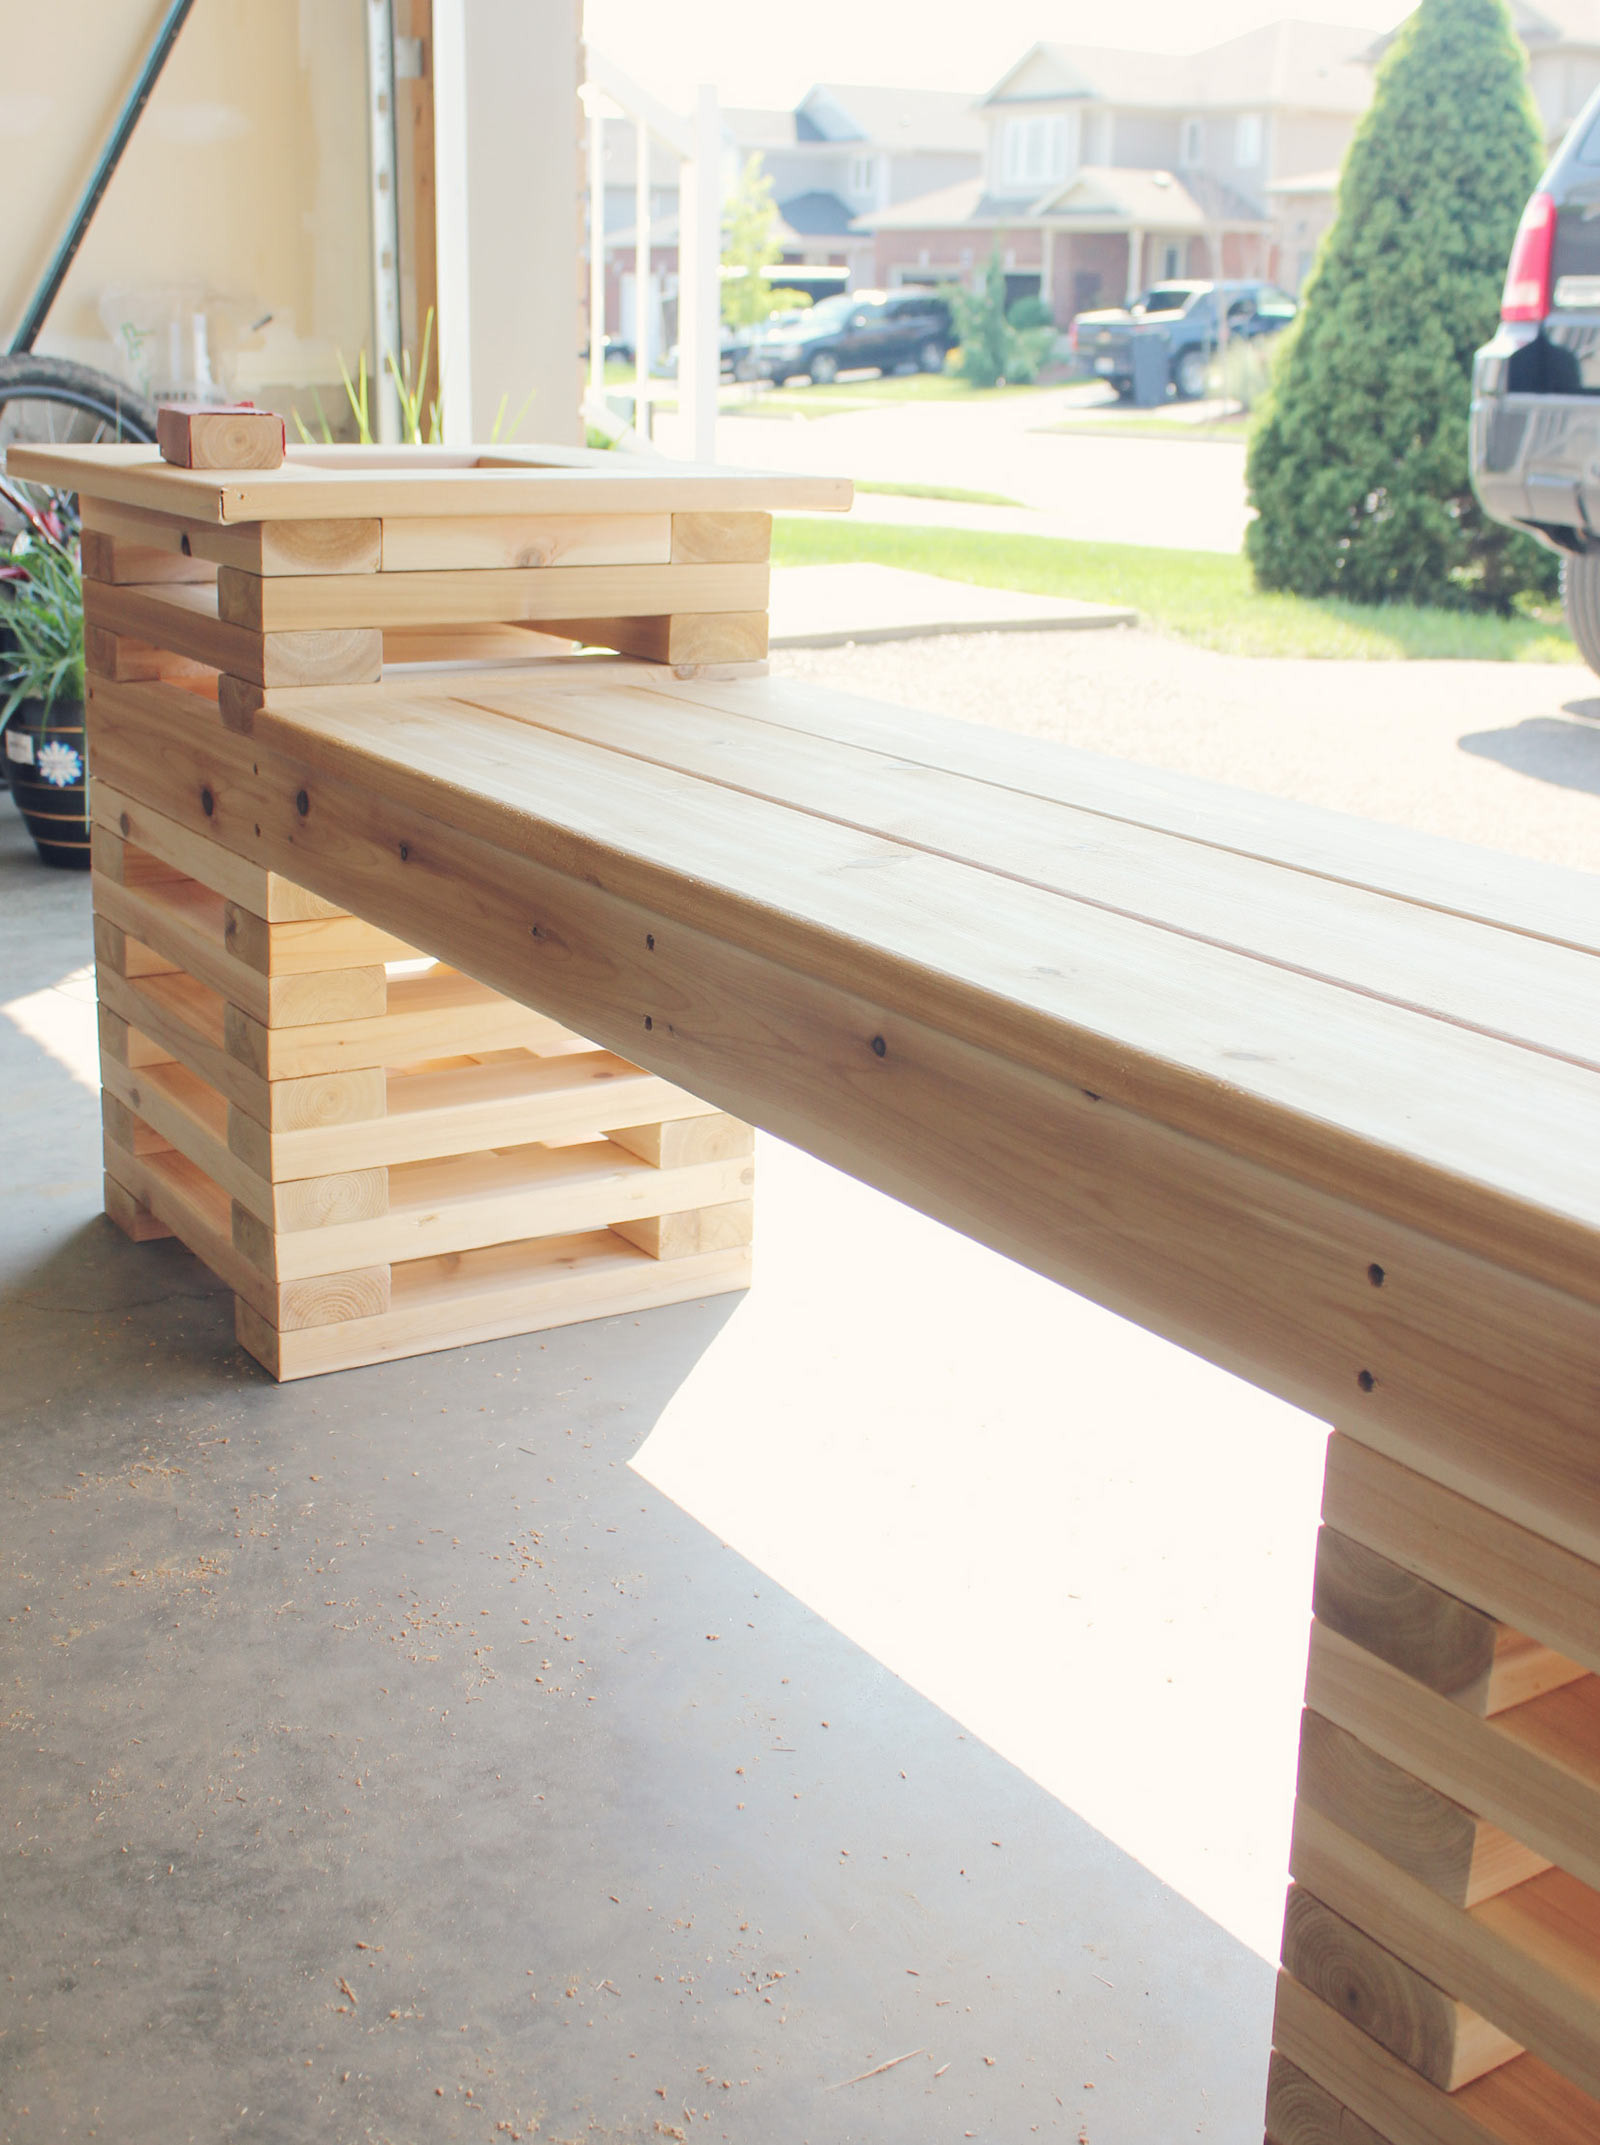 DIY Outdoor Bench With Storage
 Summer DIY Challenge with The Home Depot The Build